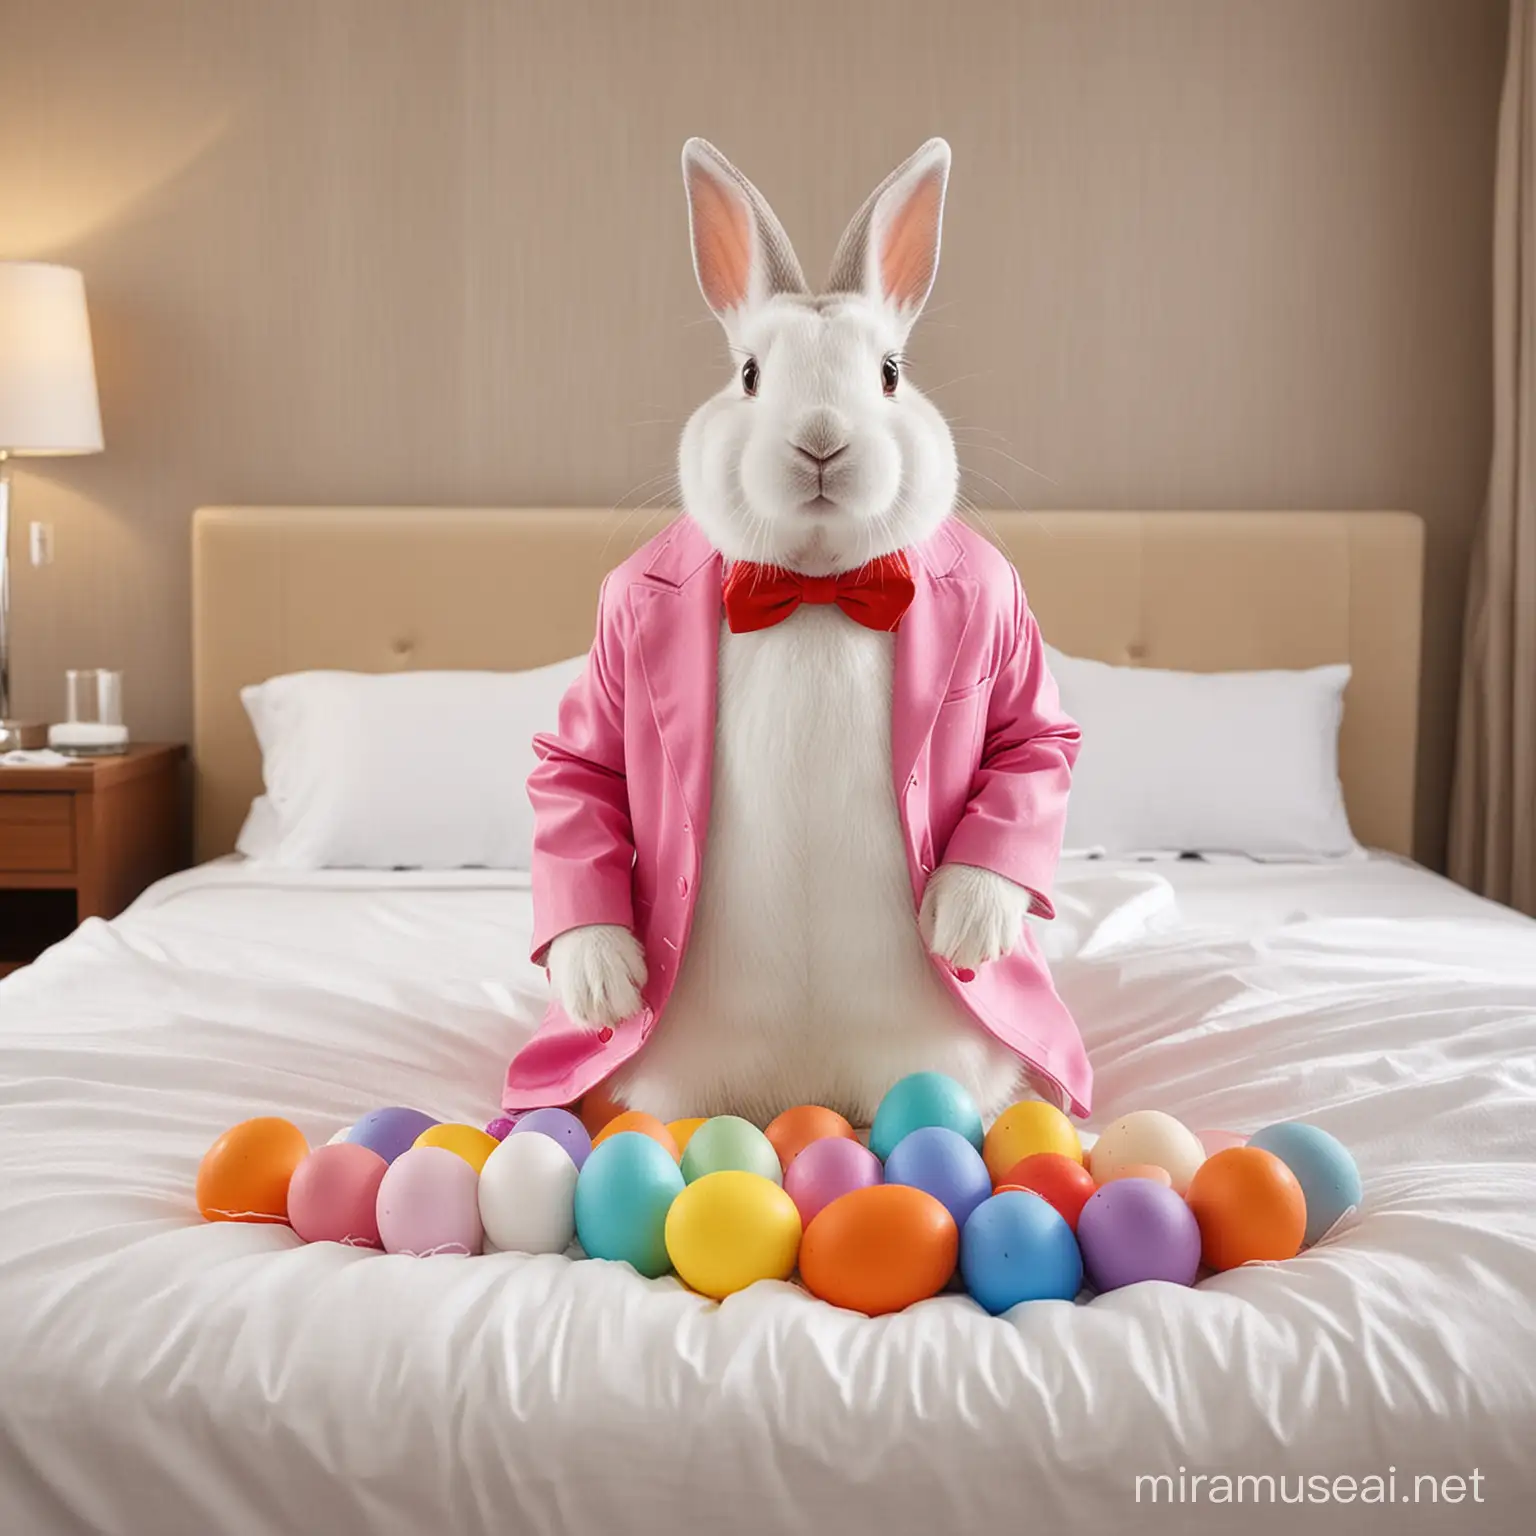 i need a dressed rabbit with colored eggs in hotel room